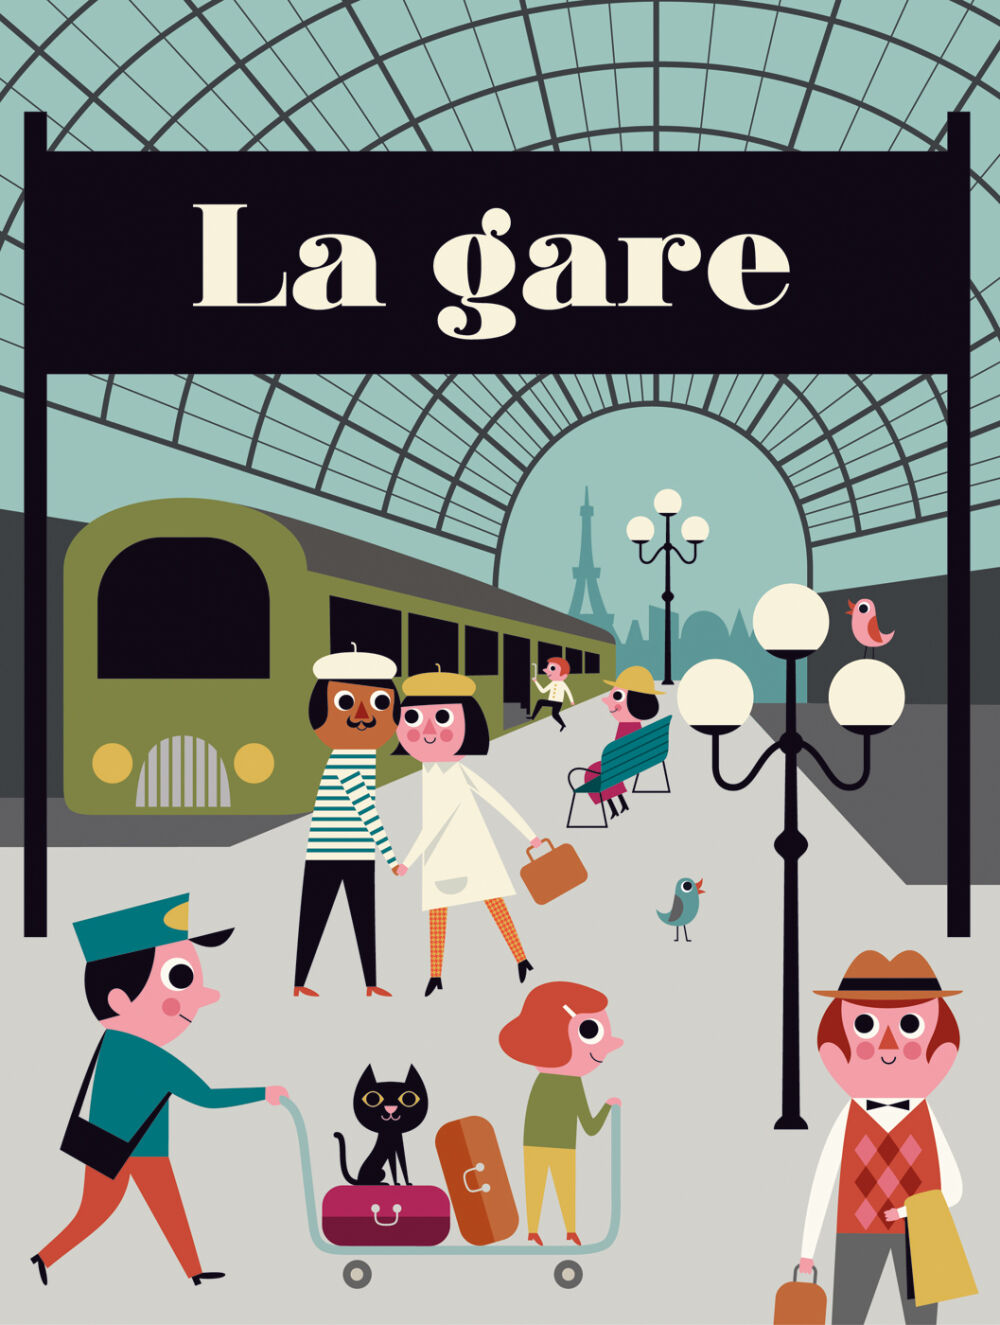 City poster La Gare, illustrated people and characters by Ingela P Arrhenius